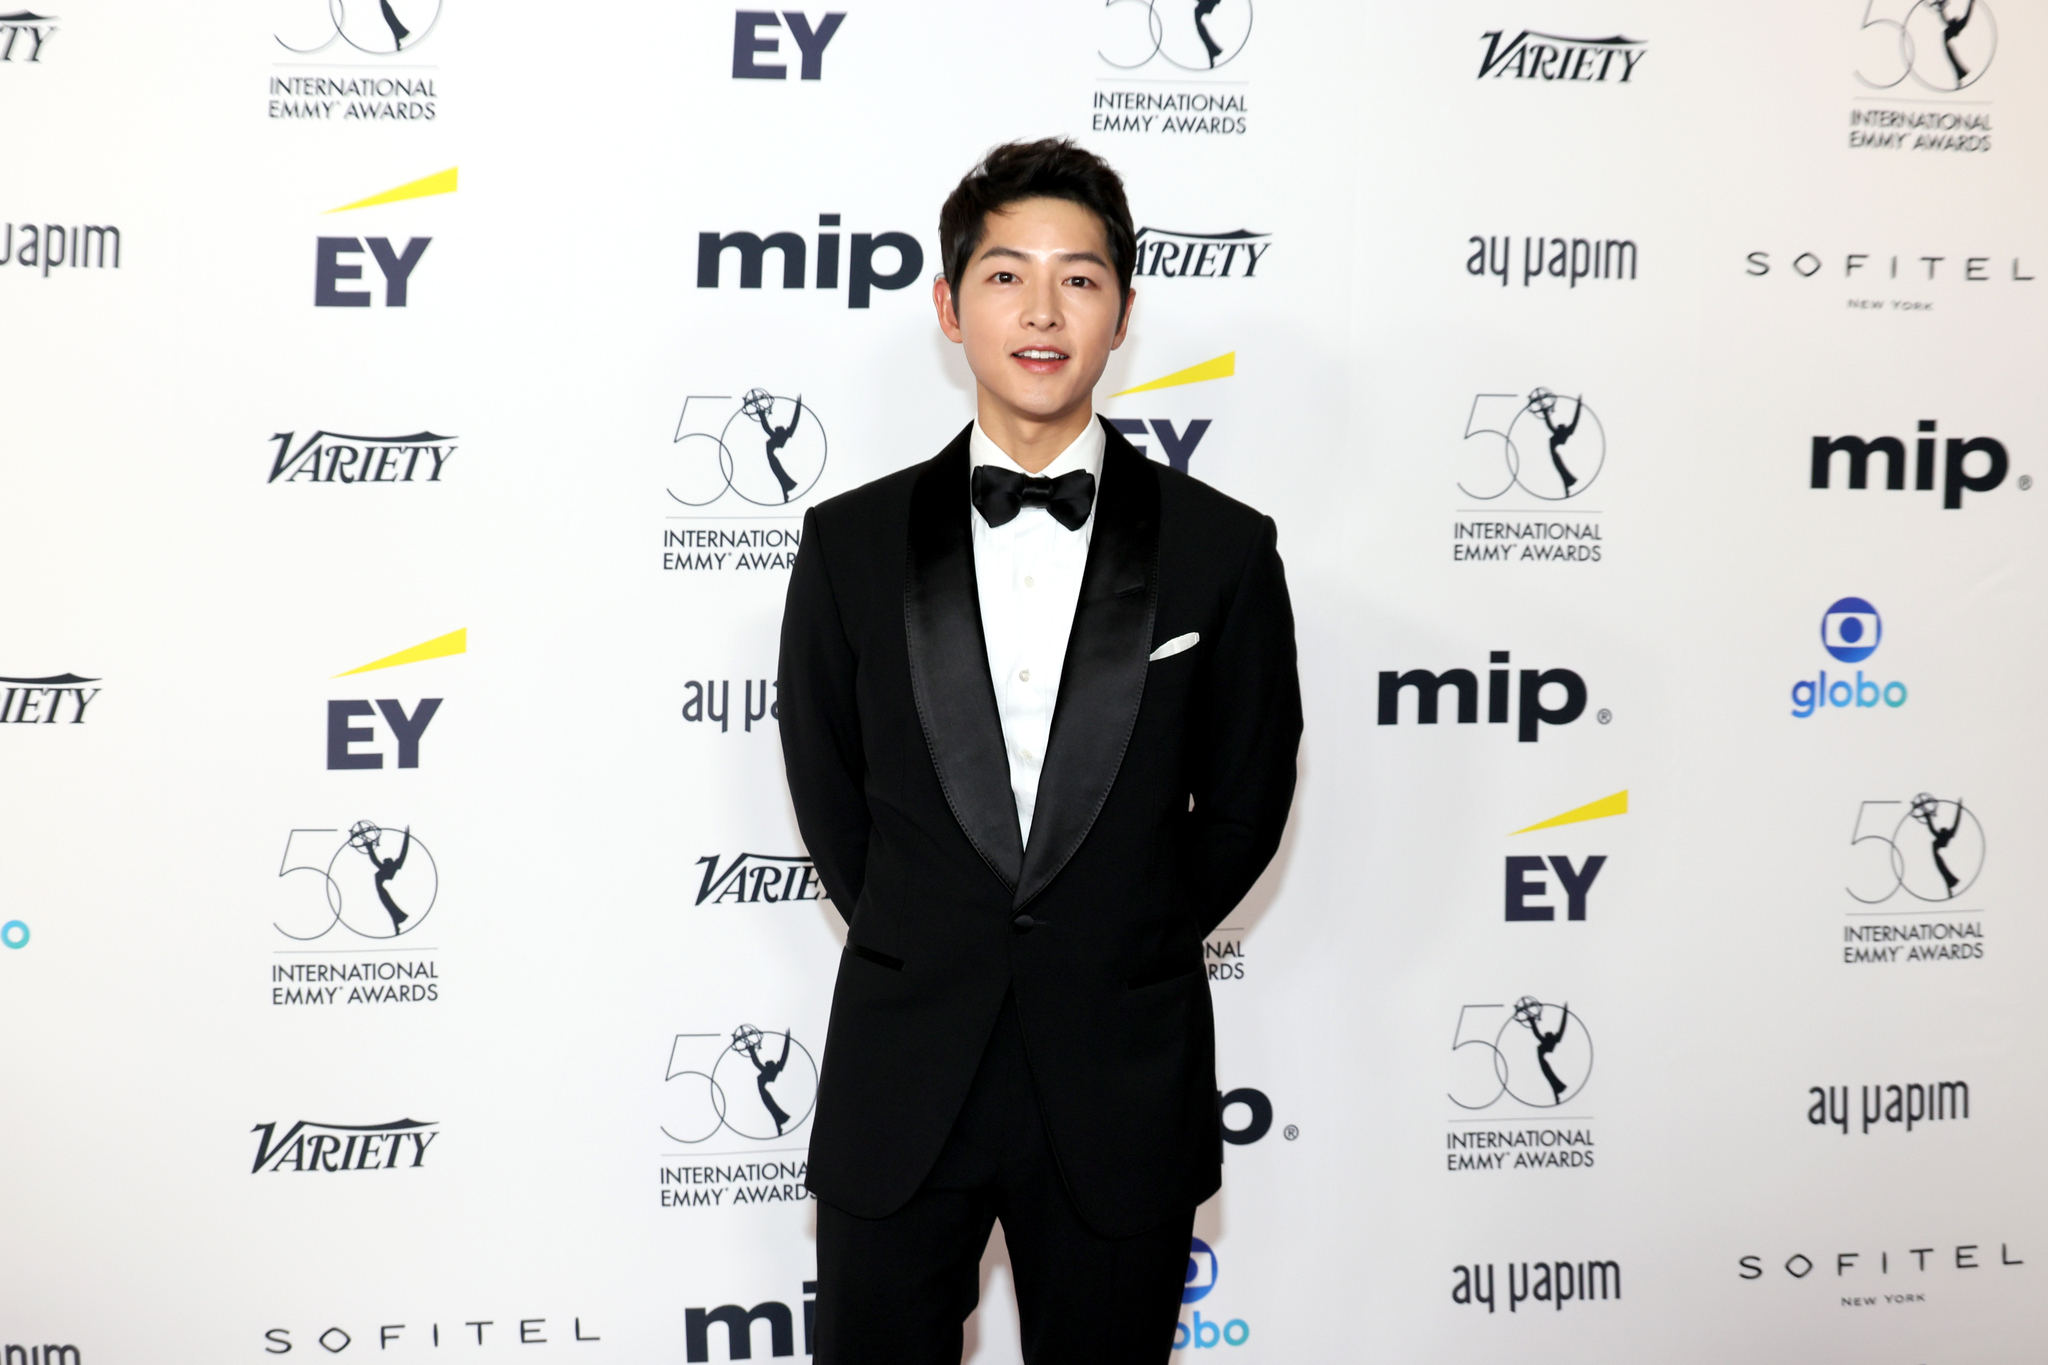 NEW YORK, NEW YORK - NOVEMBER 21: Song Joong-Ki attends the 50th International Emmy Awards at New York Hilton Midtown on November 21, 2022 in New York City. (Photo by Dia Dipasupil/Getty Images)